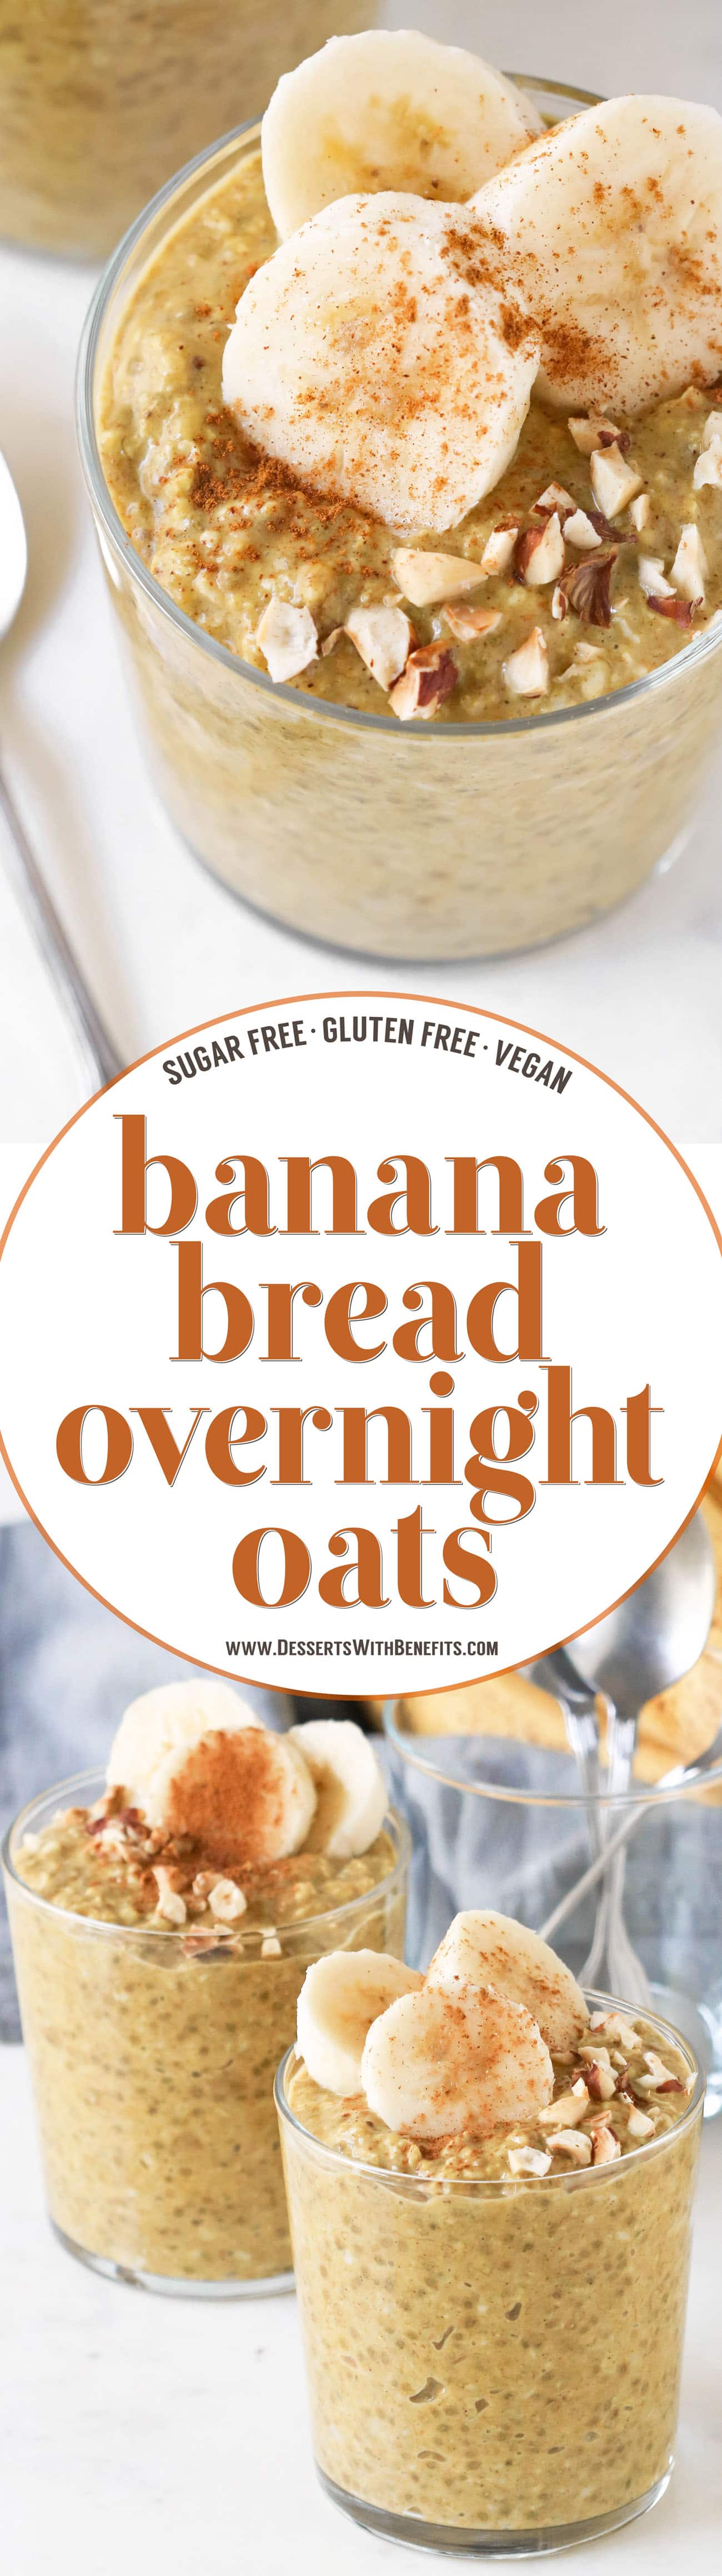 These Healthy Banana Bread Overnight Dessert Oats have all the flavor of Banana Bread but in oatmeal form, and without the butter, oil, and white sugar! This banana oatmeal is thick, sweet, and filling, and it's refined sugar free, low fat, high fiber, gluten free, dairy free, and vegan too!